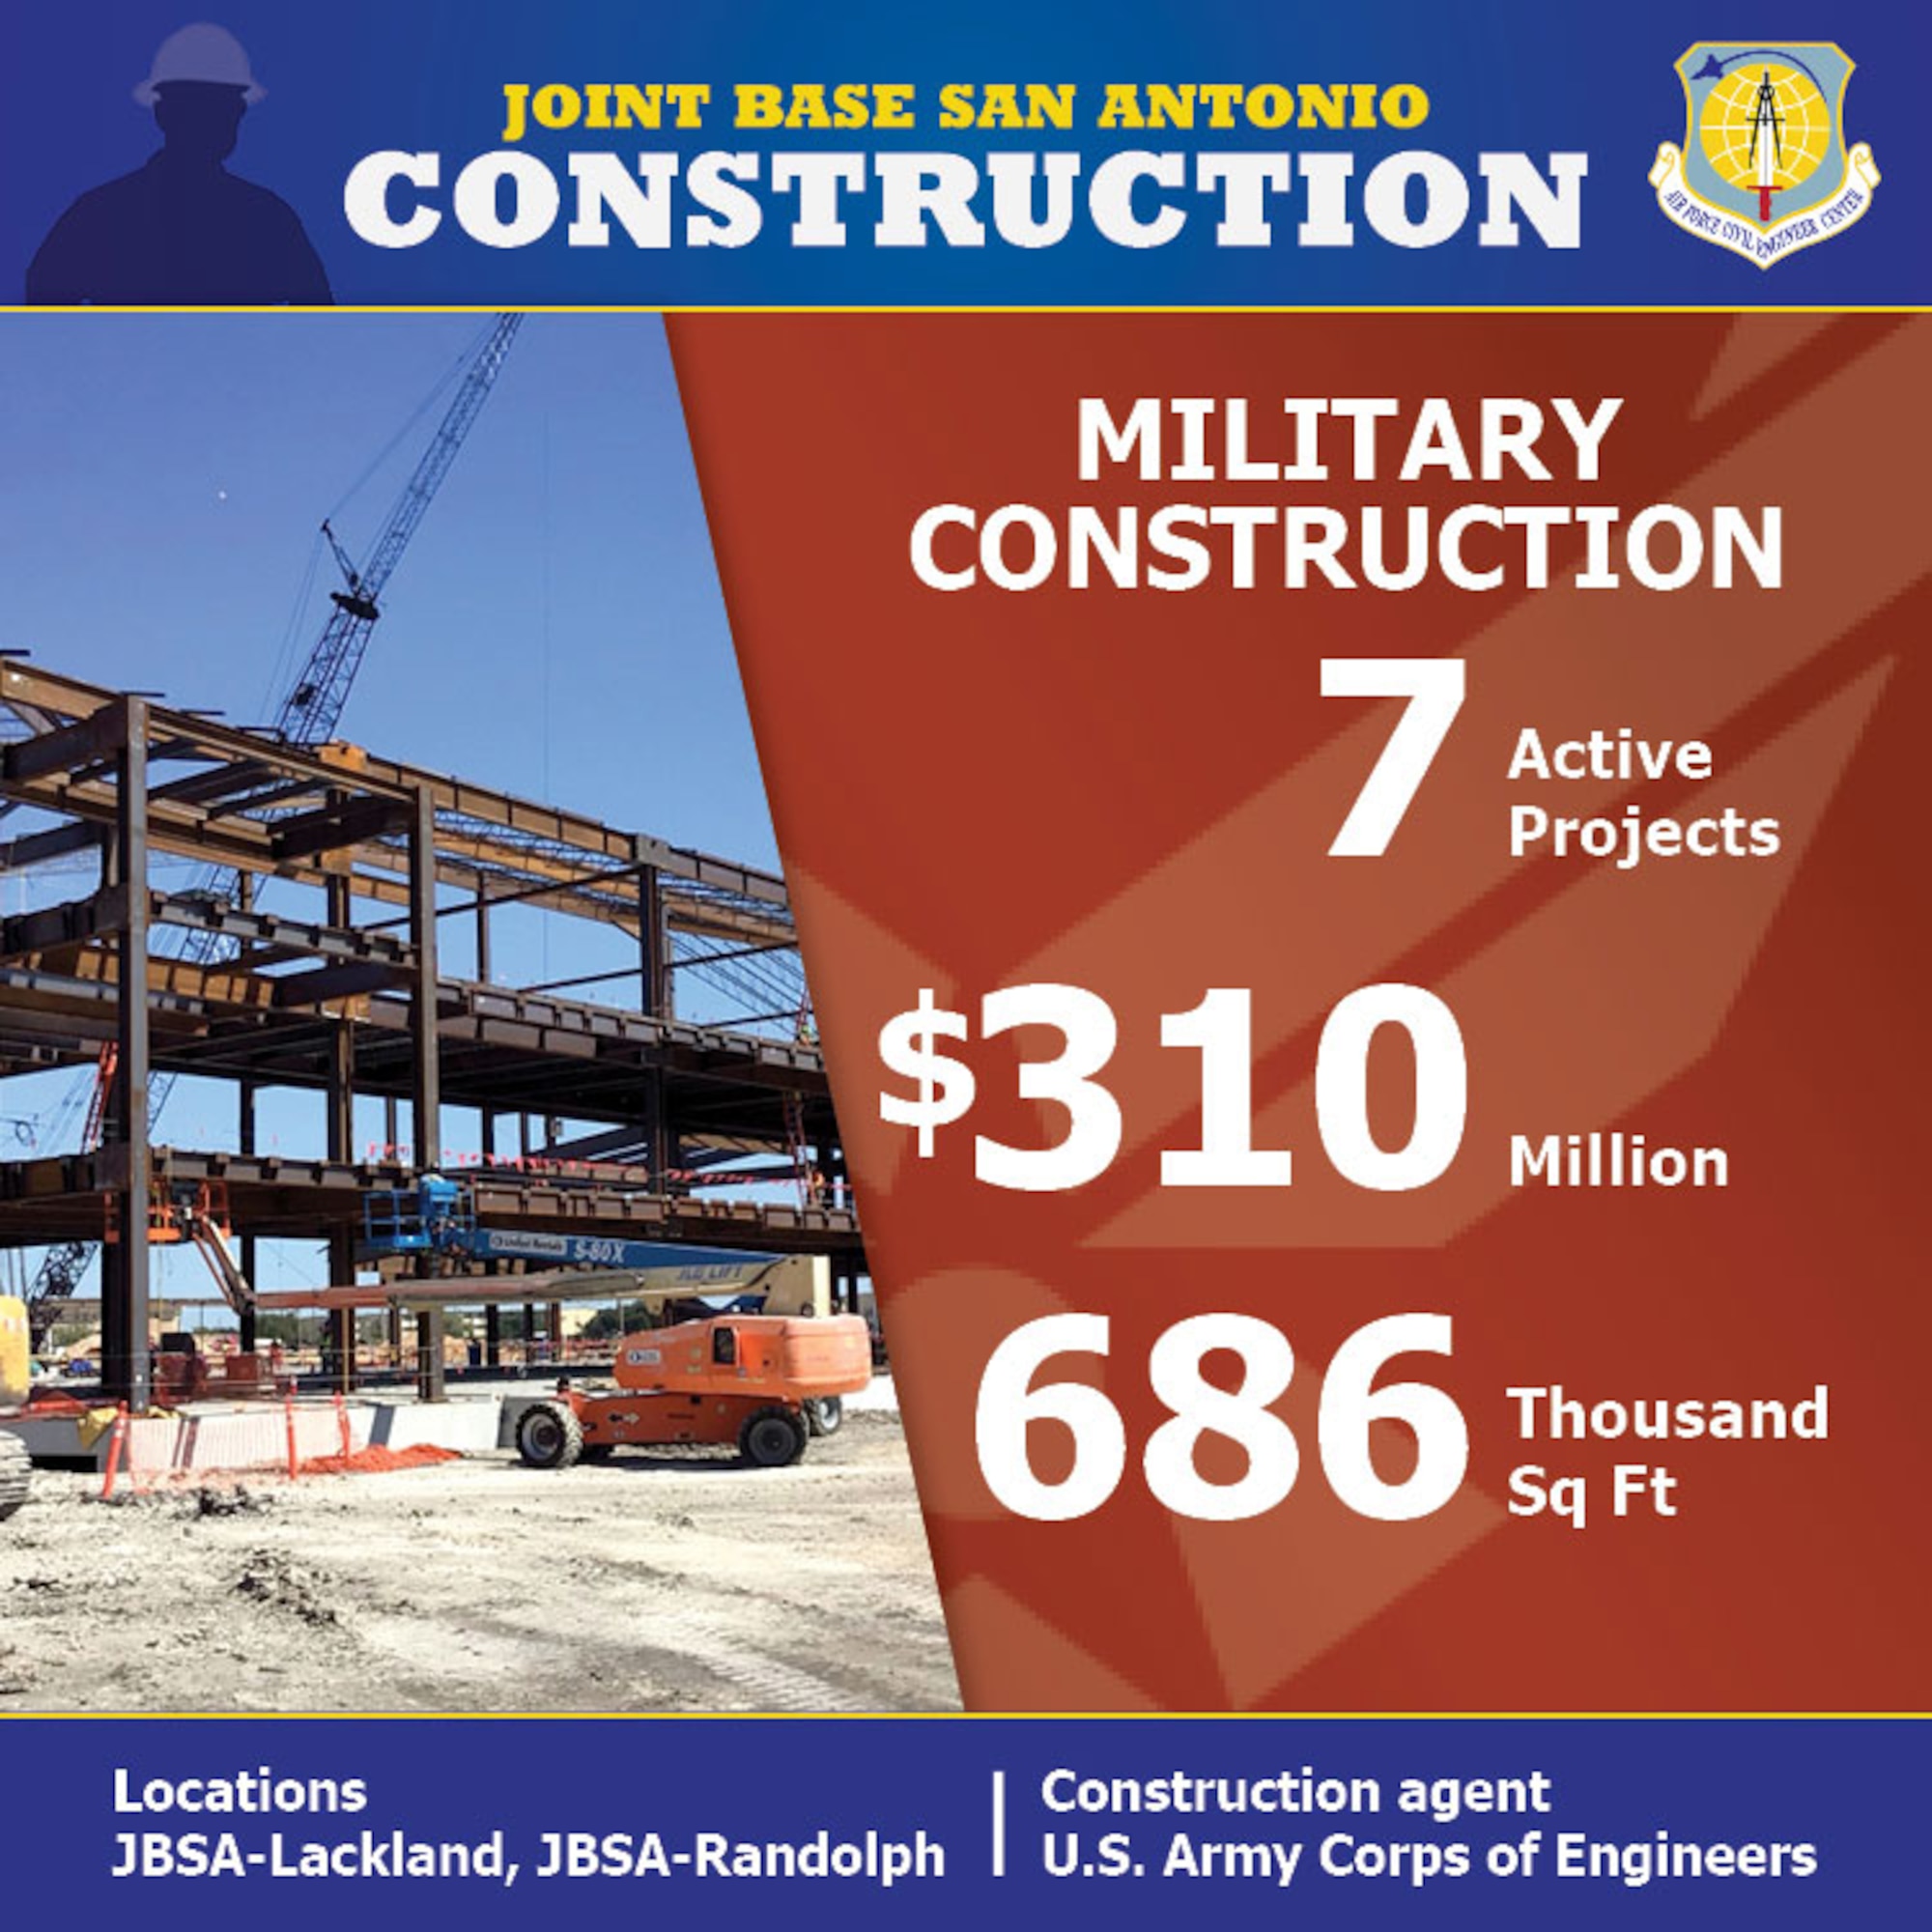 Graphic for construction projects at JBSA Lackland and Randolph